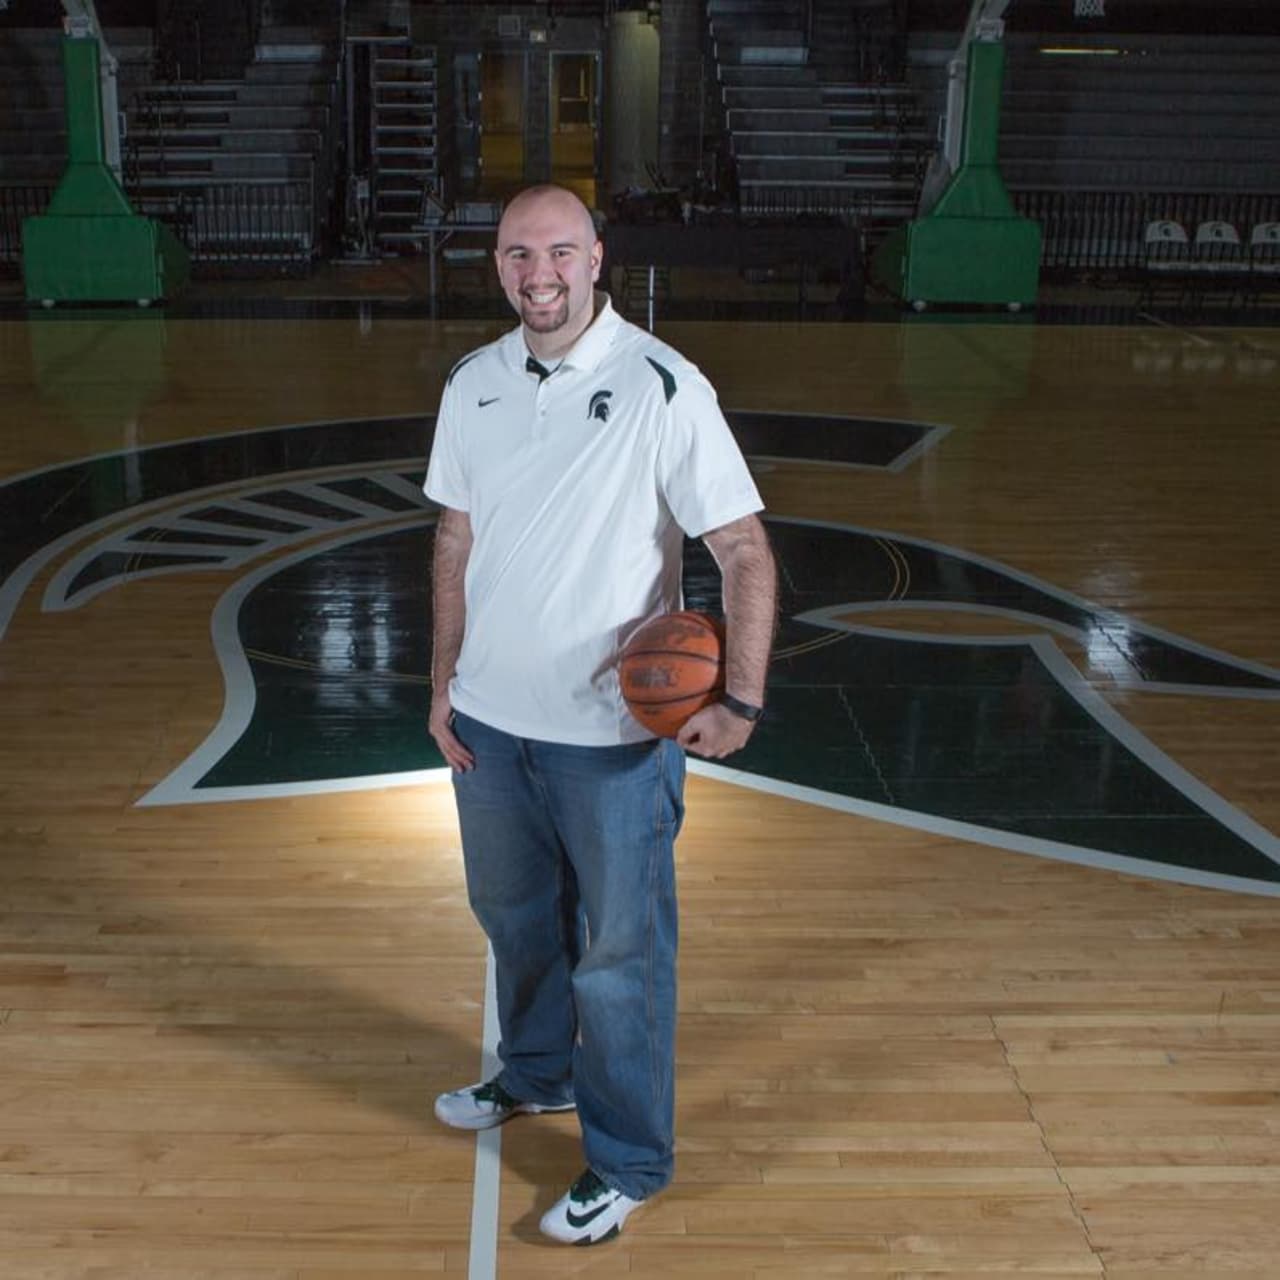 Anthony Ianni, an MSU basketball diagnosed with Autism, will be featured throughout the Relentless Tour on April 28 through April 30.